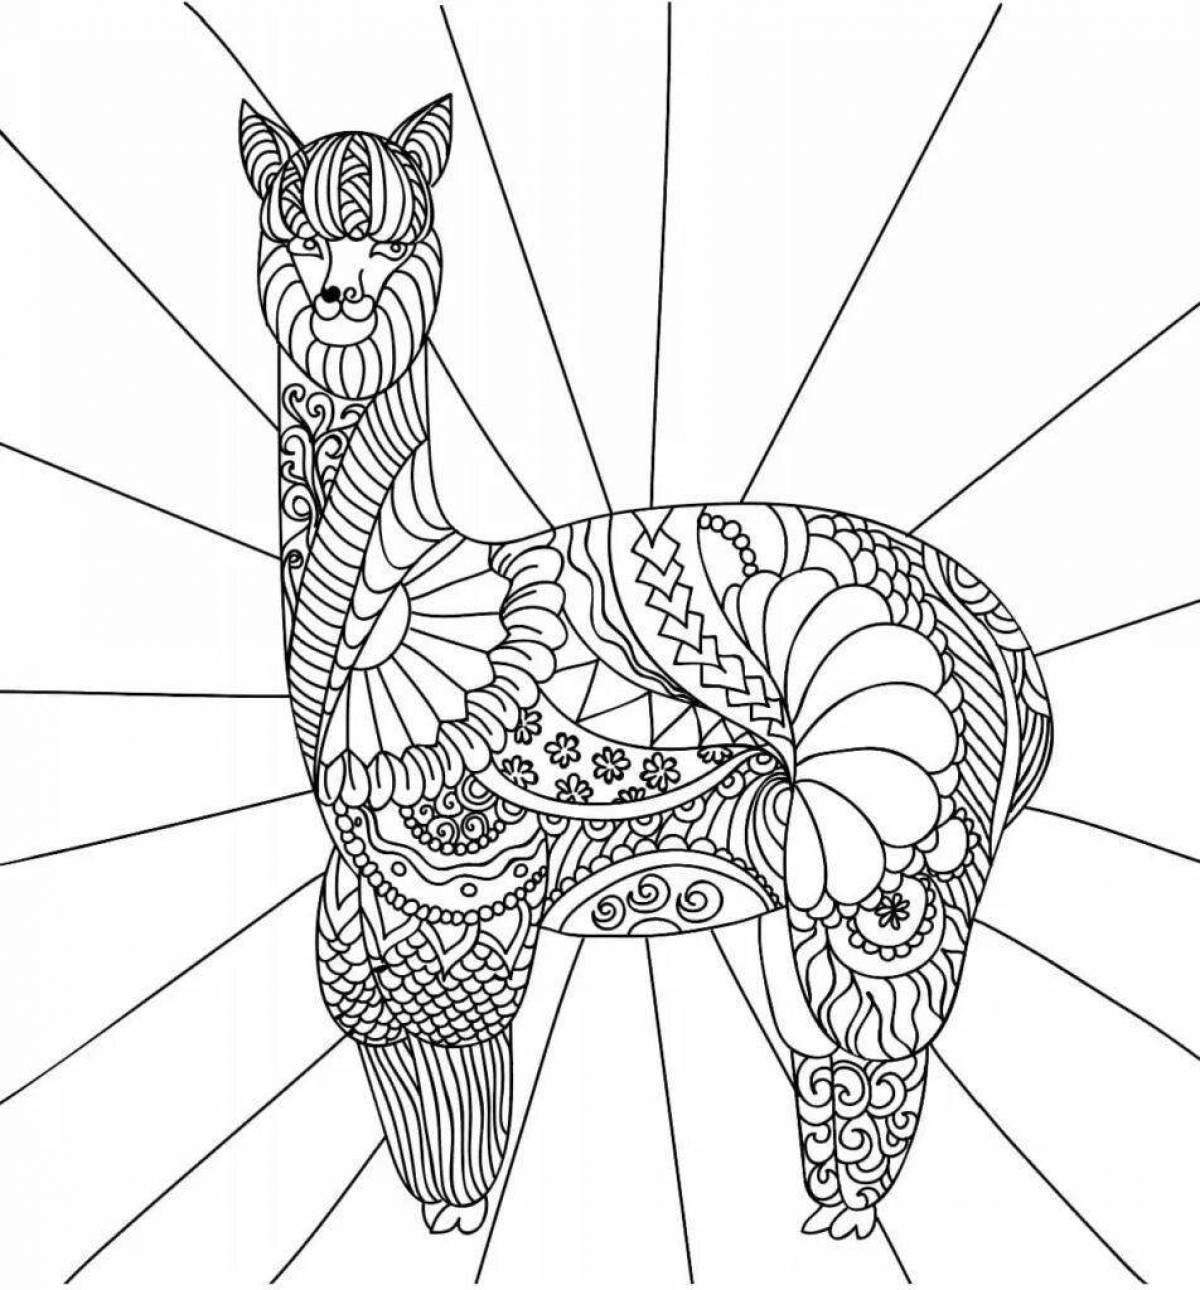 Inspirational coloring book to relax the nervous system